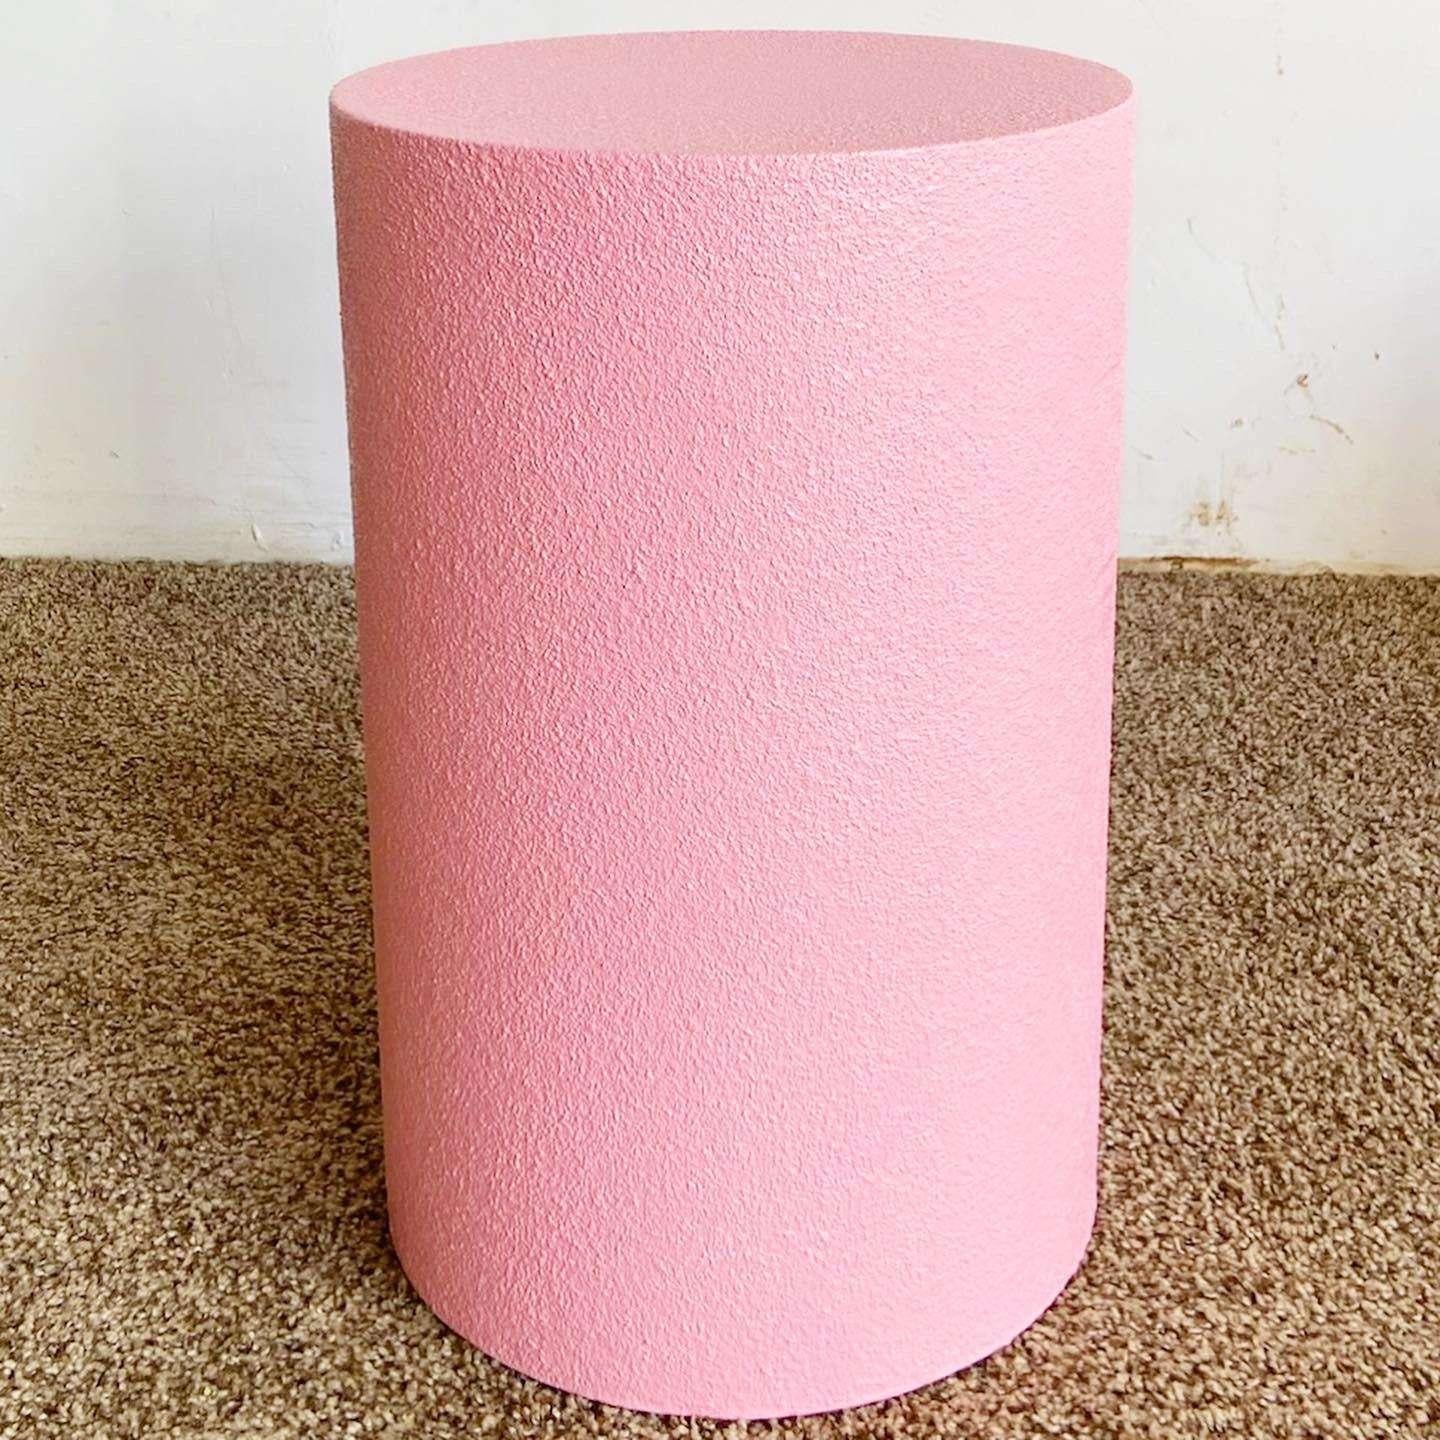 Late 20th Century Postmodern Pink Textured Finish Cylindrical Pedestals - a Pair For Sale